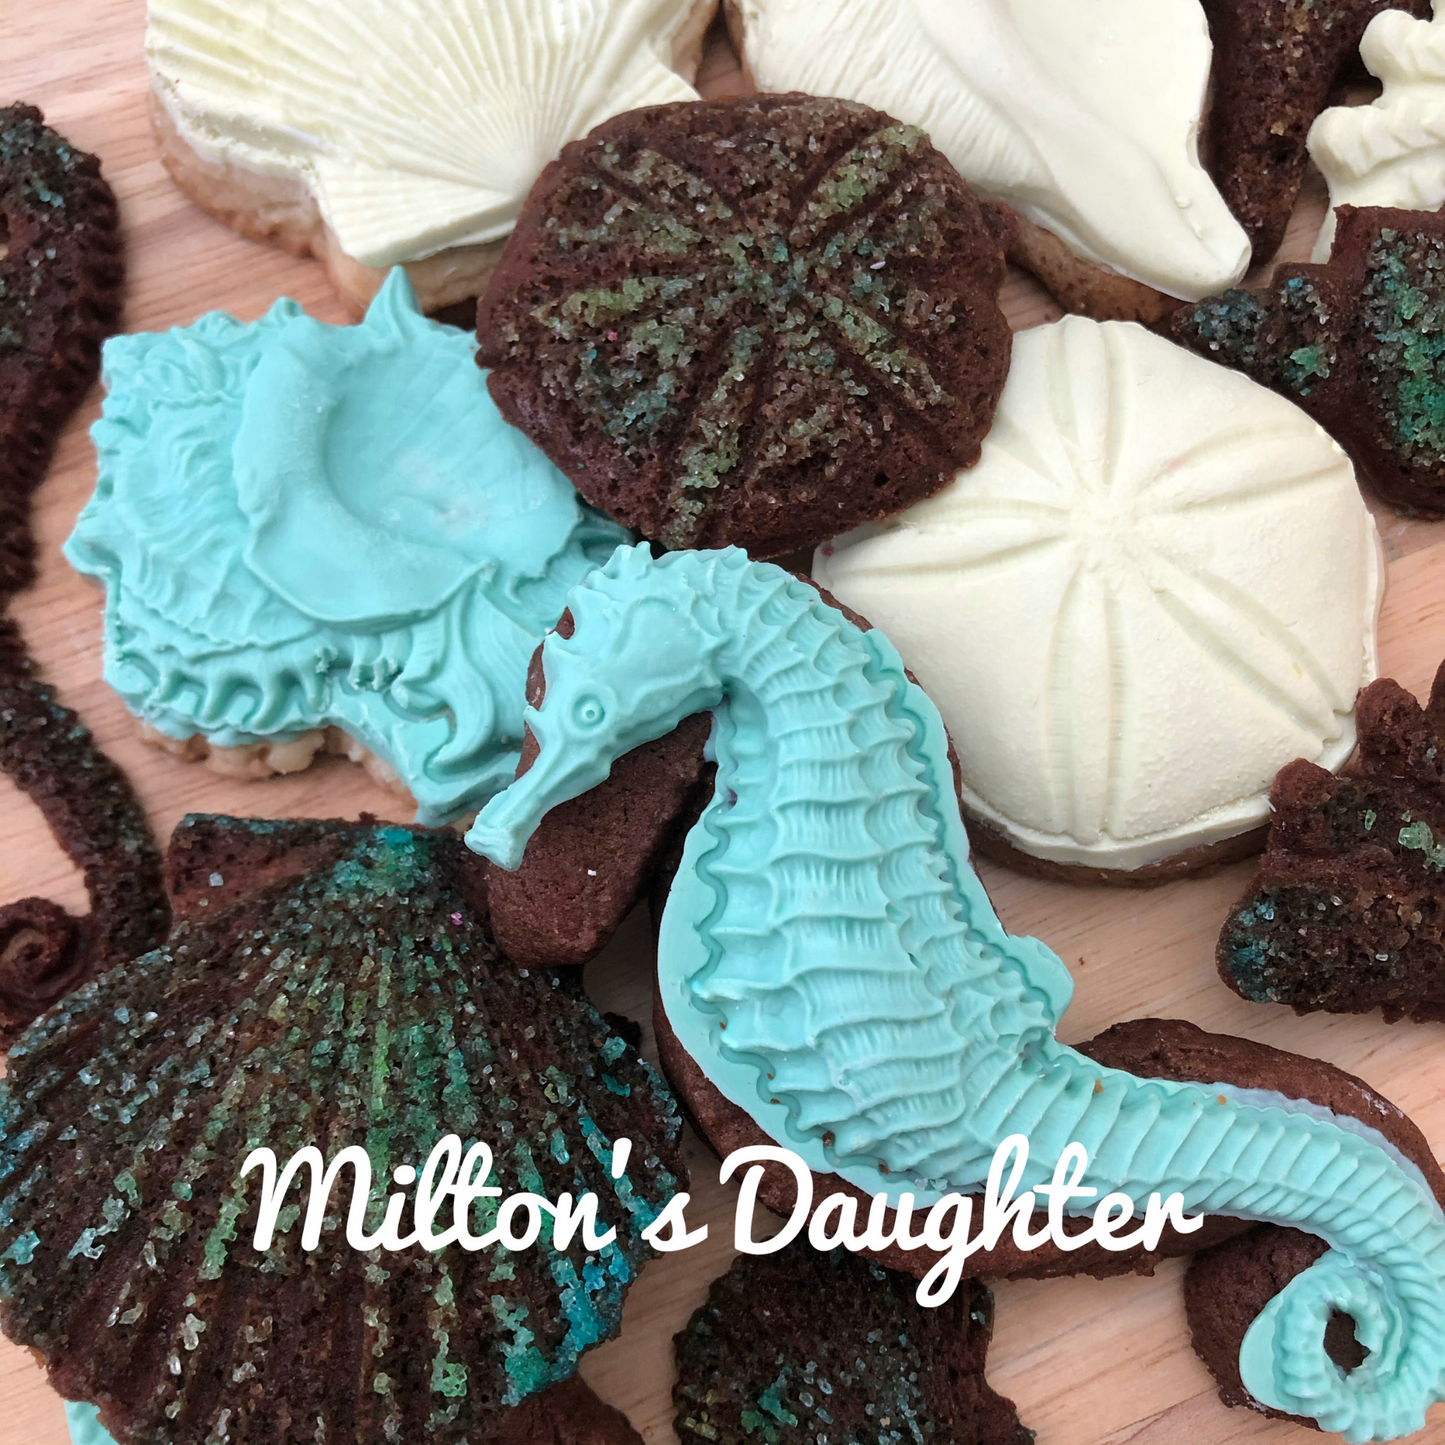 Sea Shells mold by IOD featuring blue and white chocolate cookies by Milton's Daughter